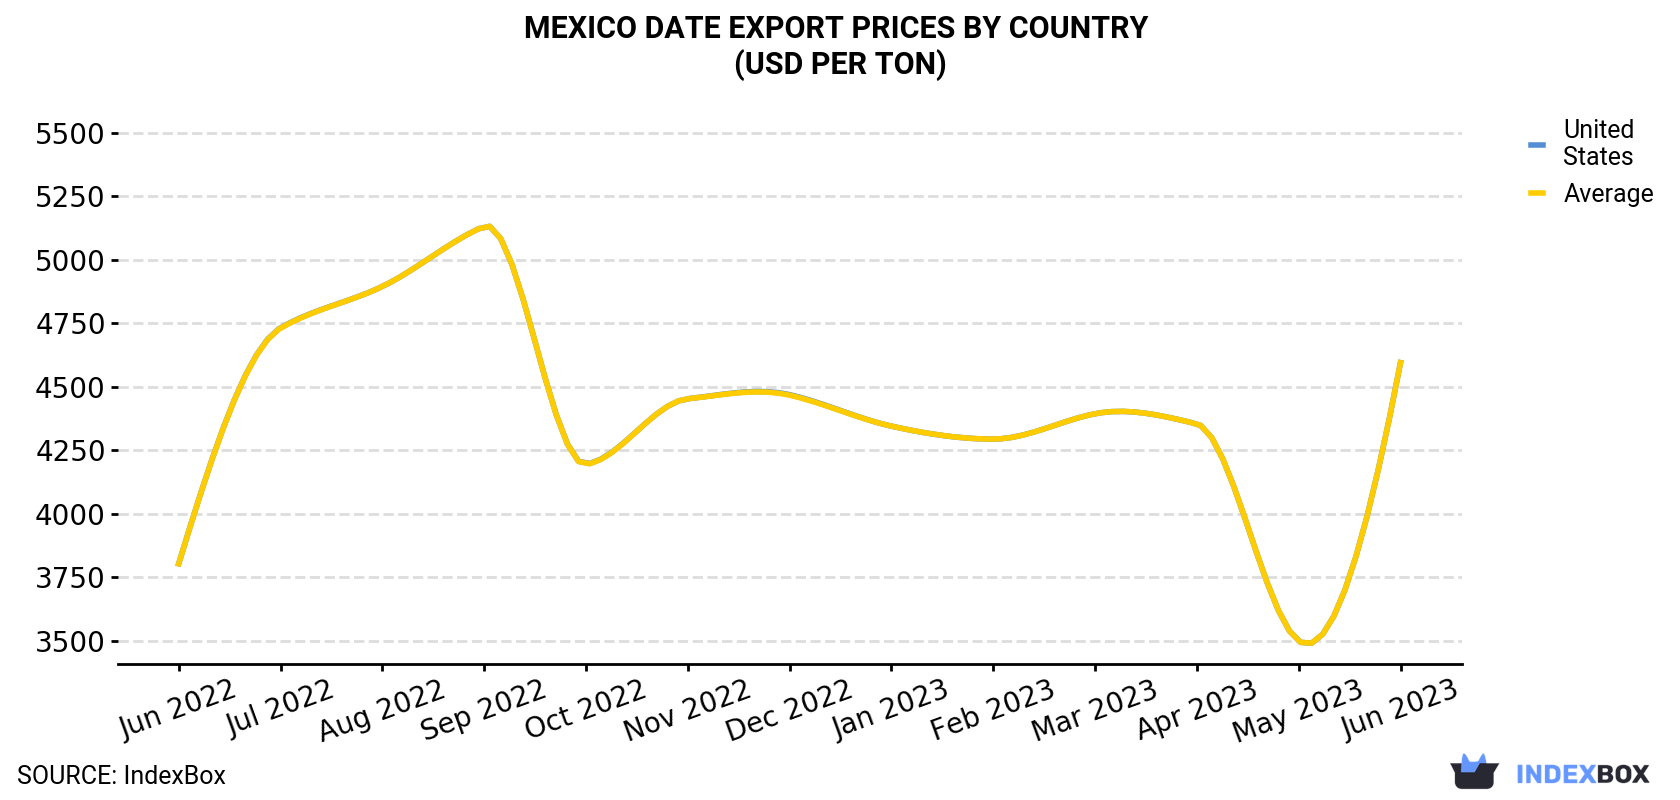 Mexico Date Export Prices By Country (USD Per Ton)